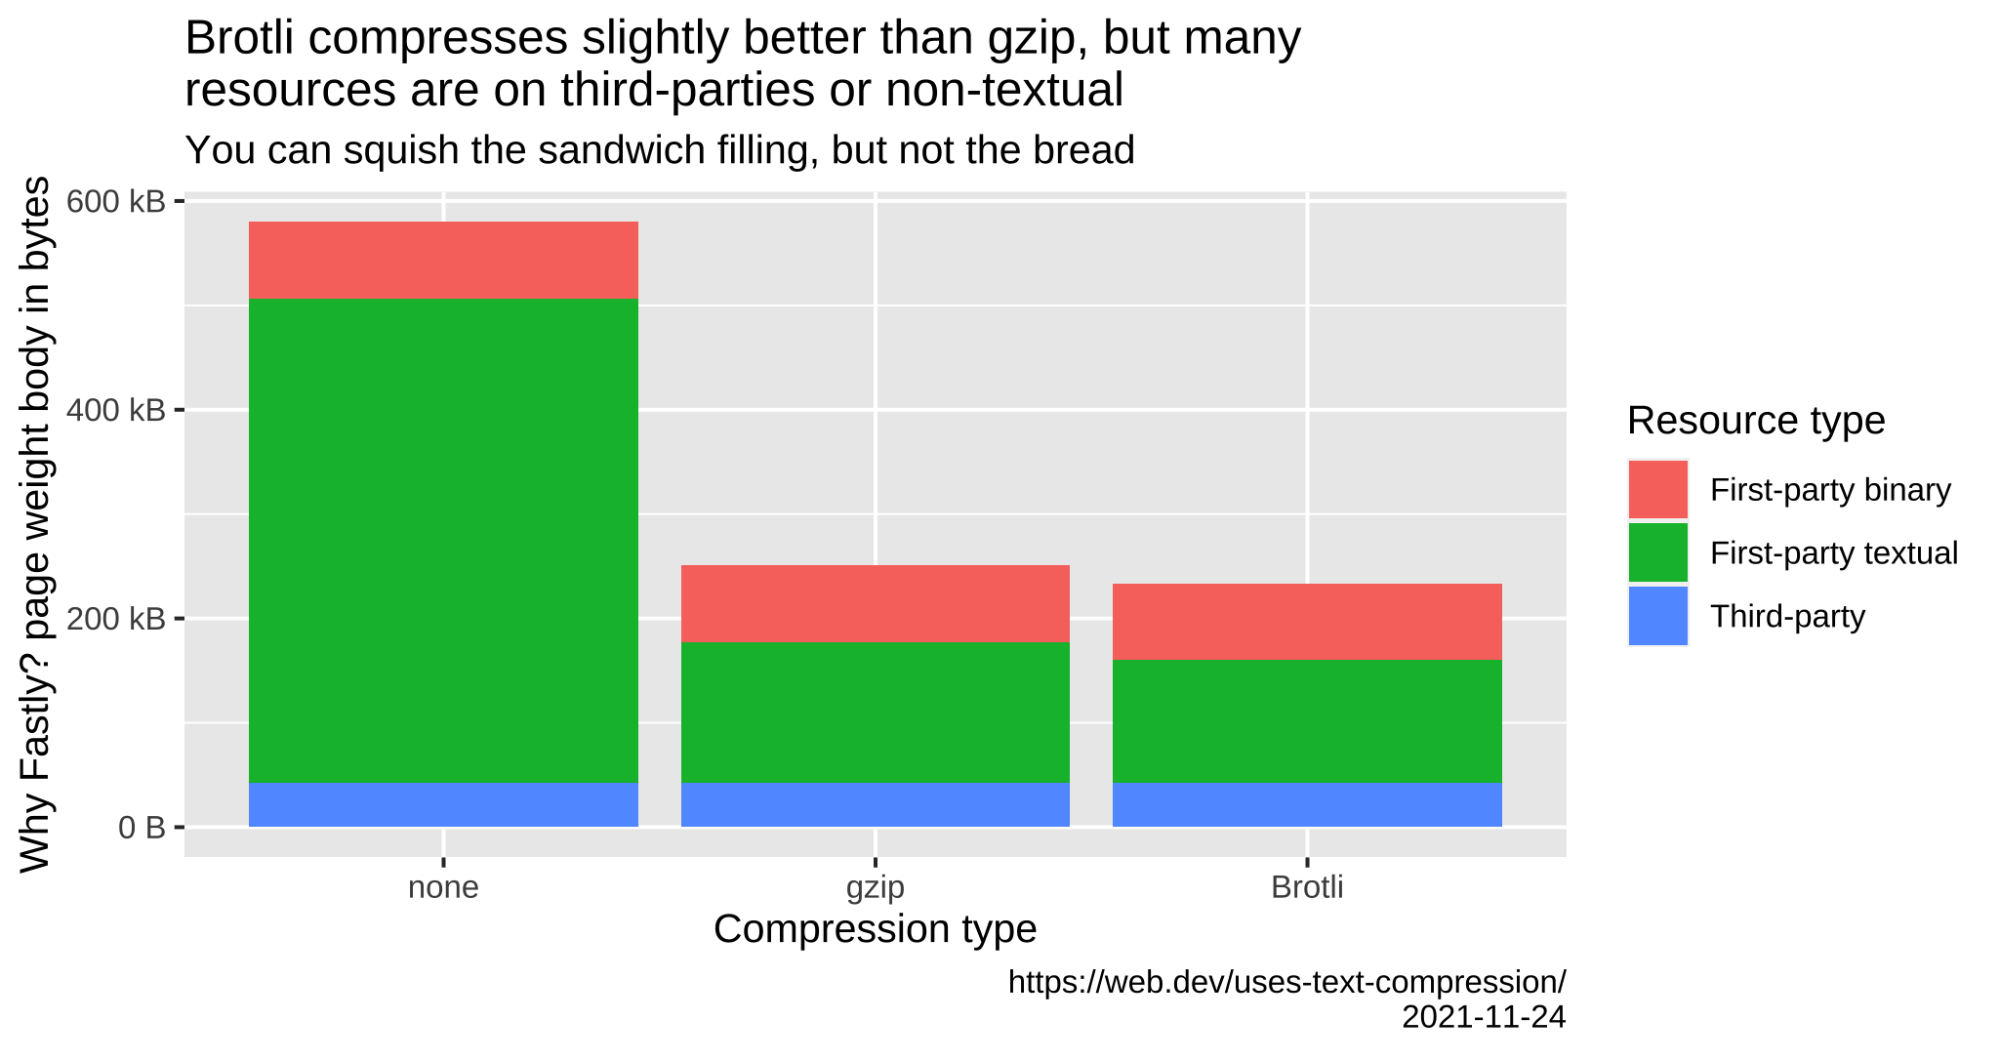 Brotli compresses slightly better than gzip, but many resources are on third parties or non-textual